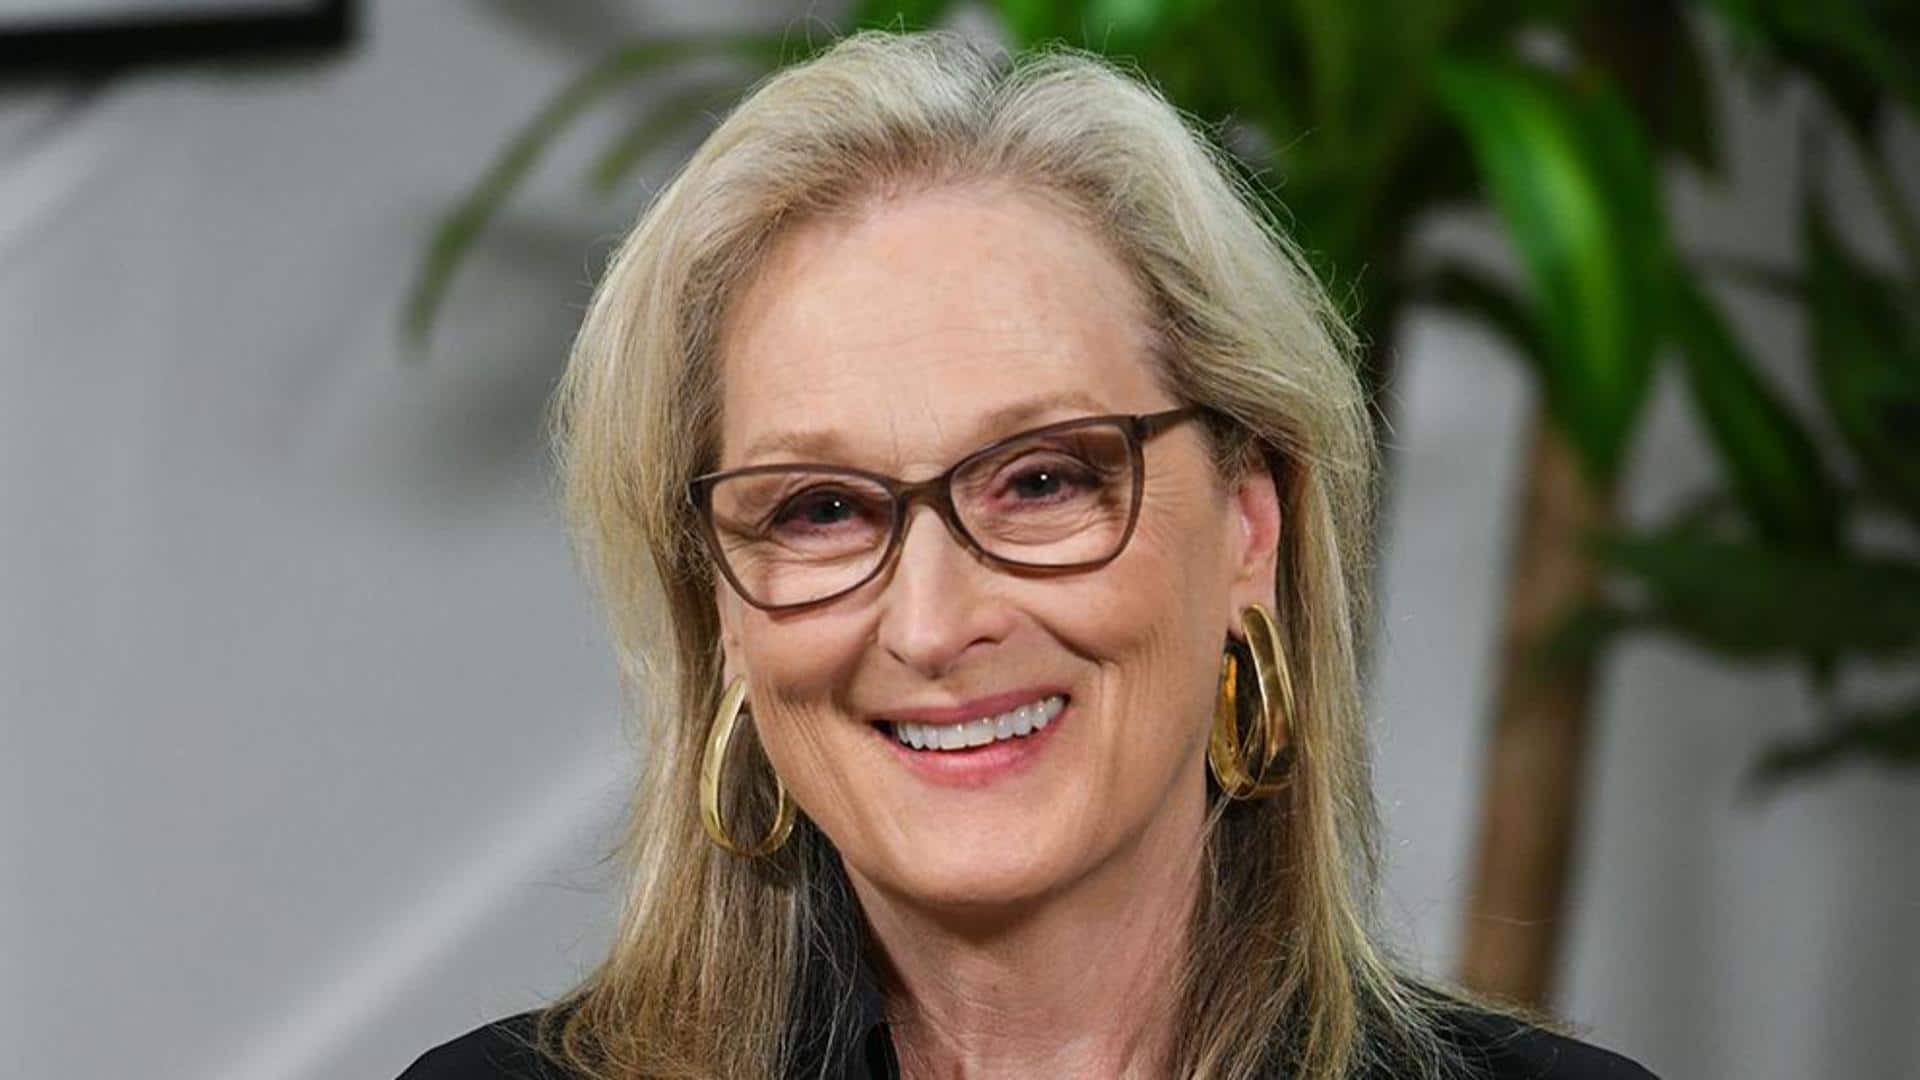 Meryl Streep joins 'Only Murders in the Building' for S3